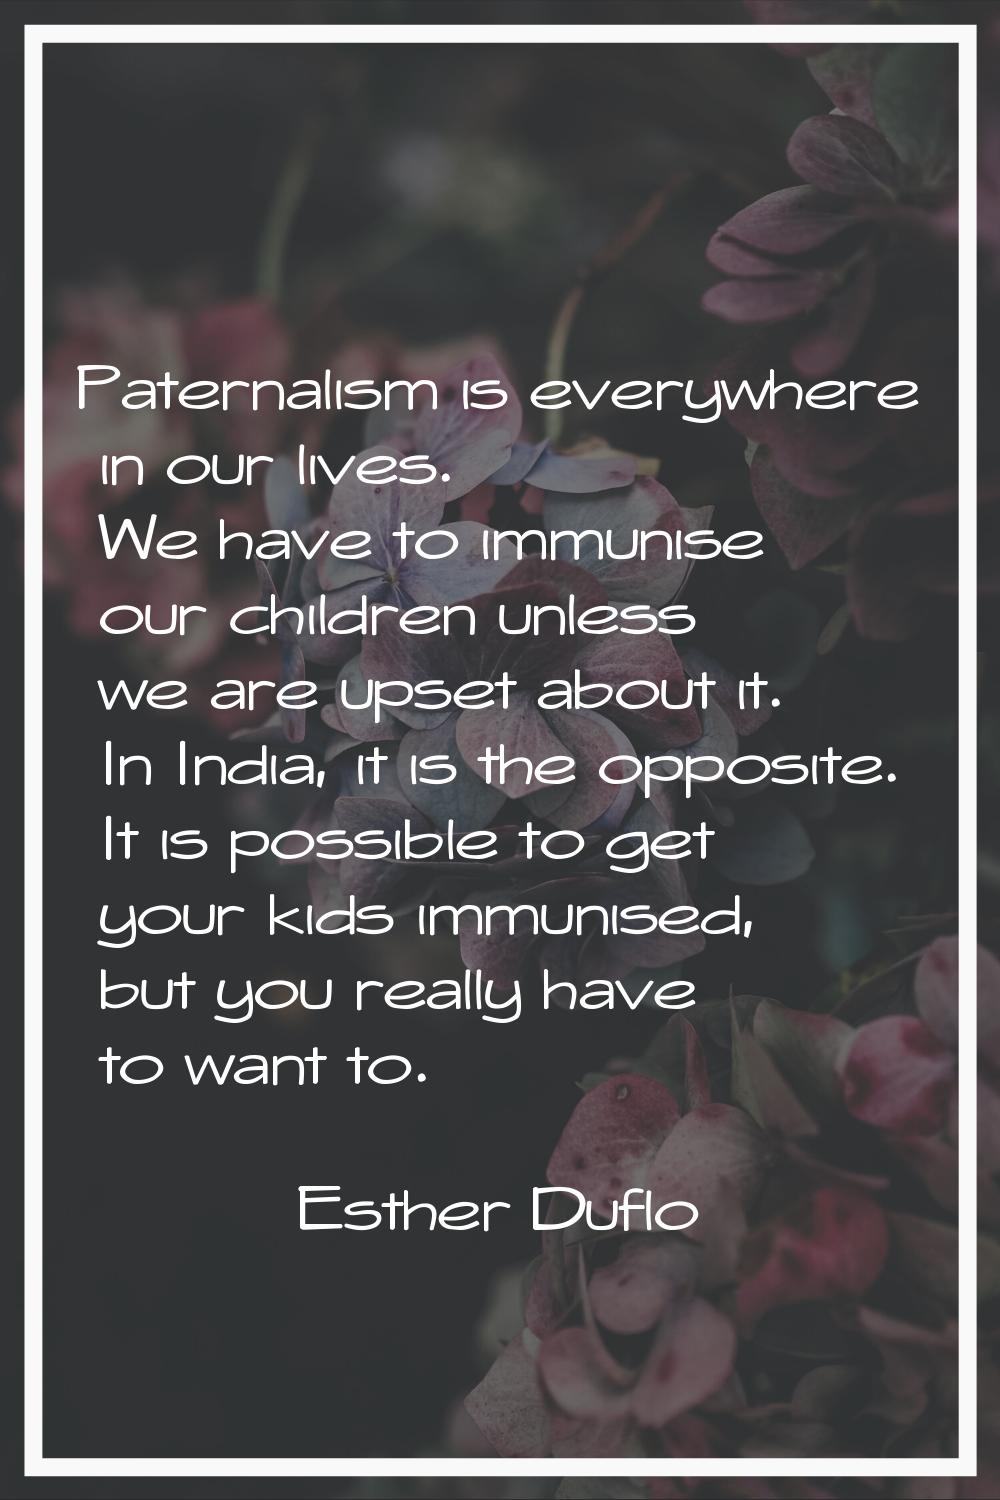 Paternalism is everywhere in our lives. We have to immunise our children unless we are upset about 